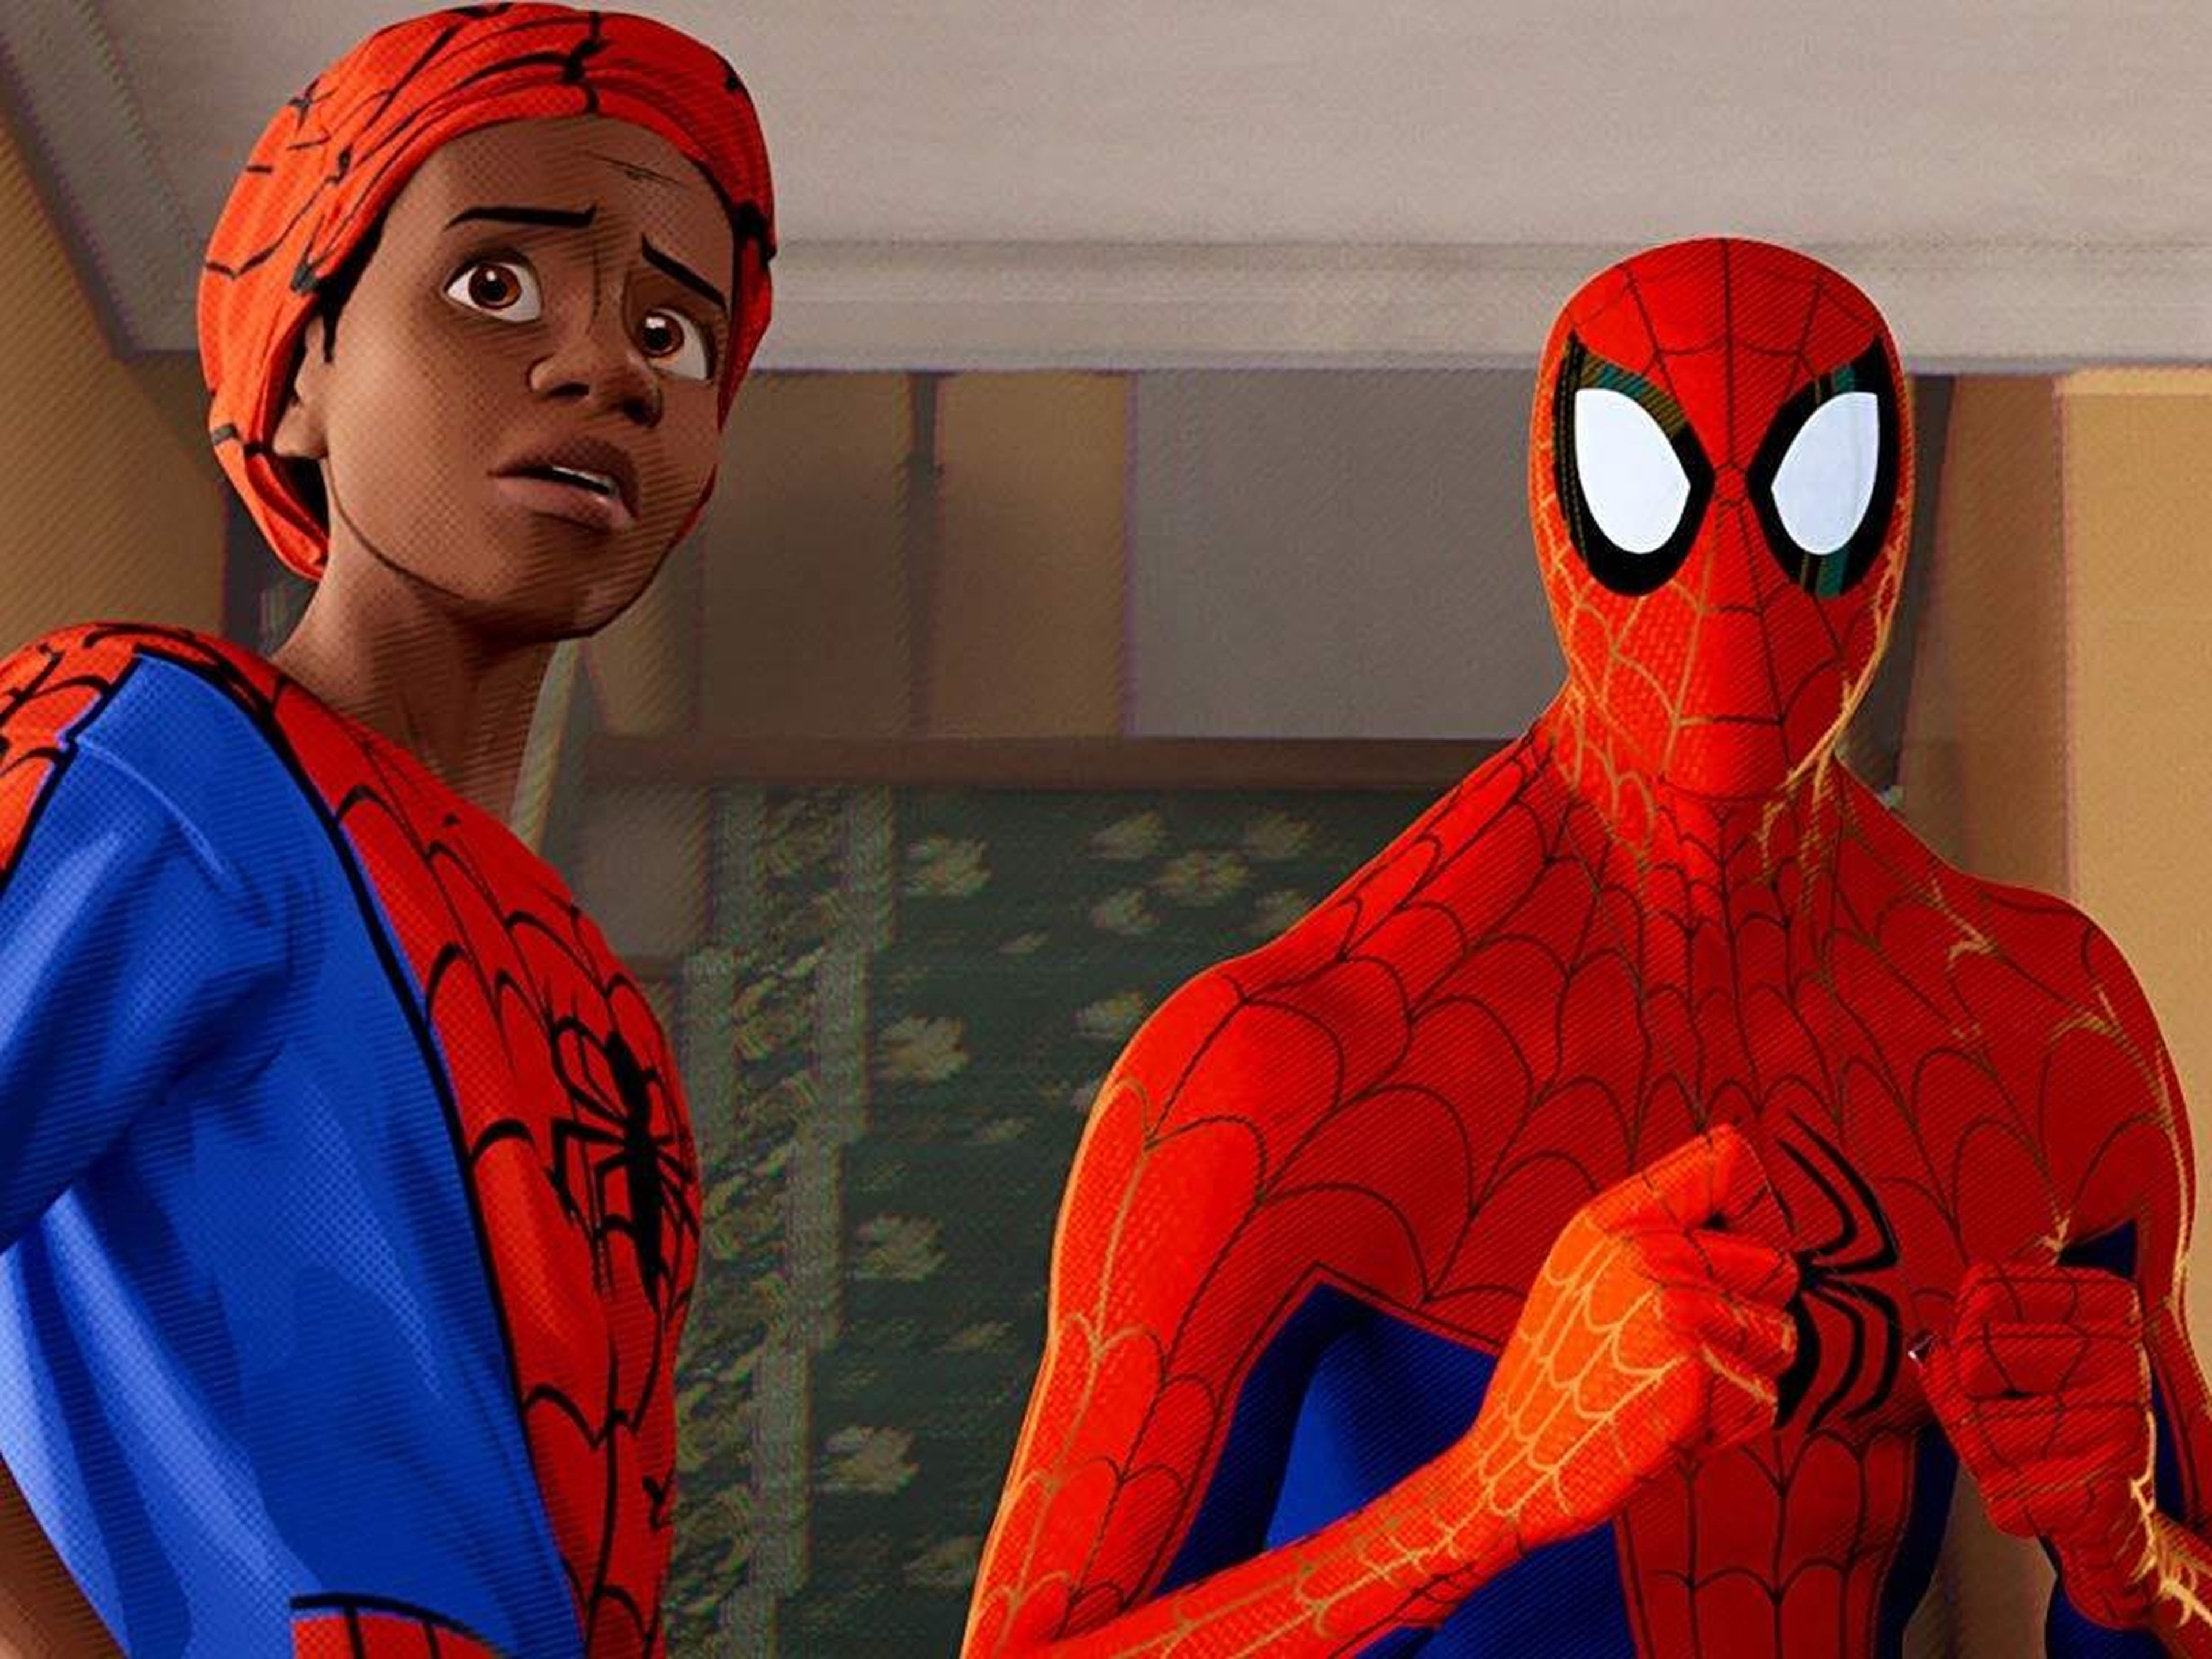 "Spider-Man: Into the Spider-Verse" is a Marvel film.